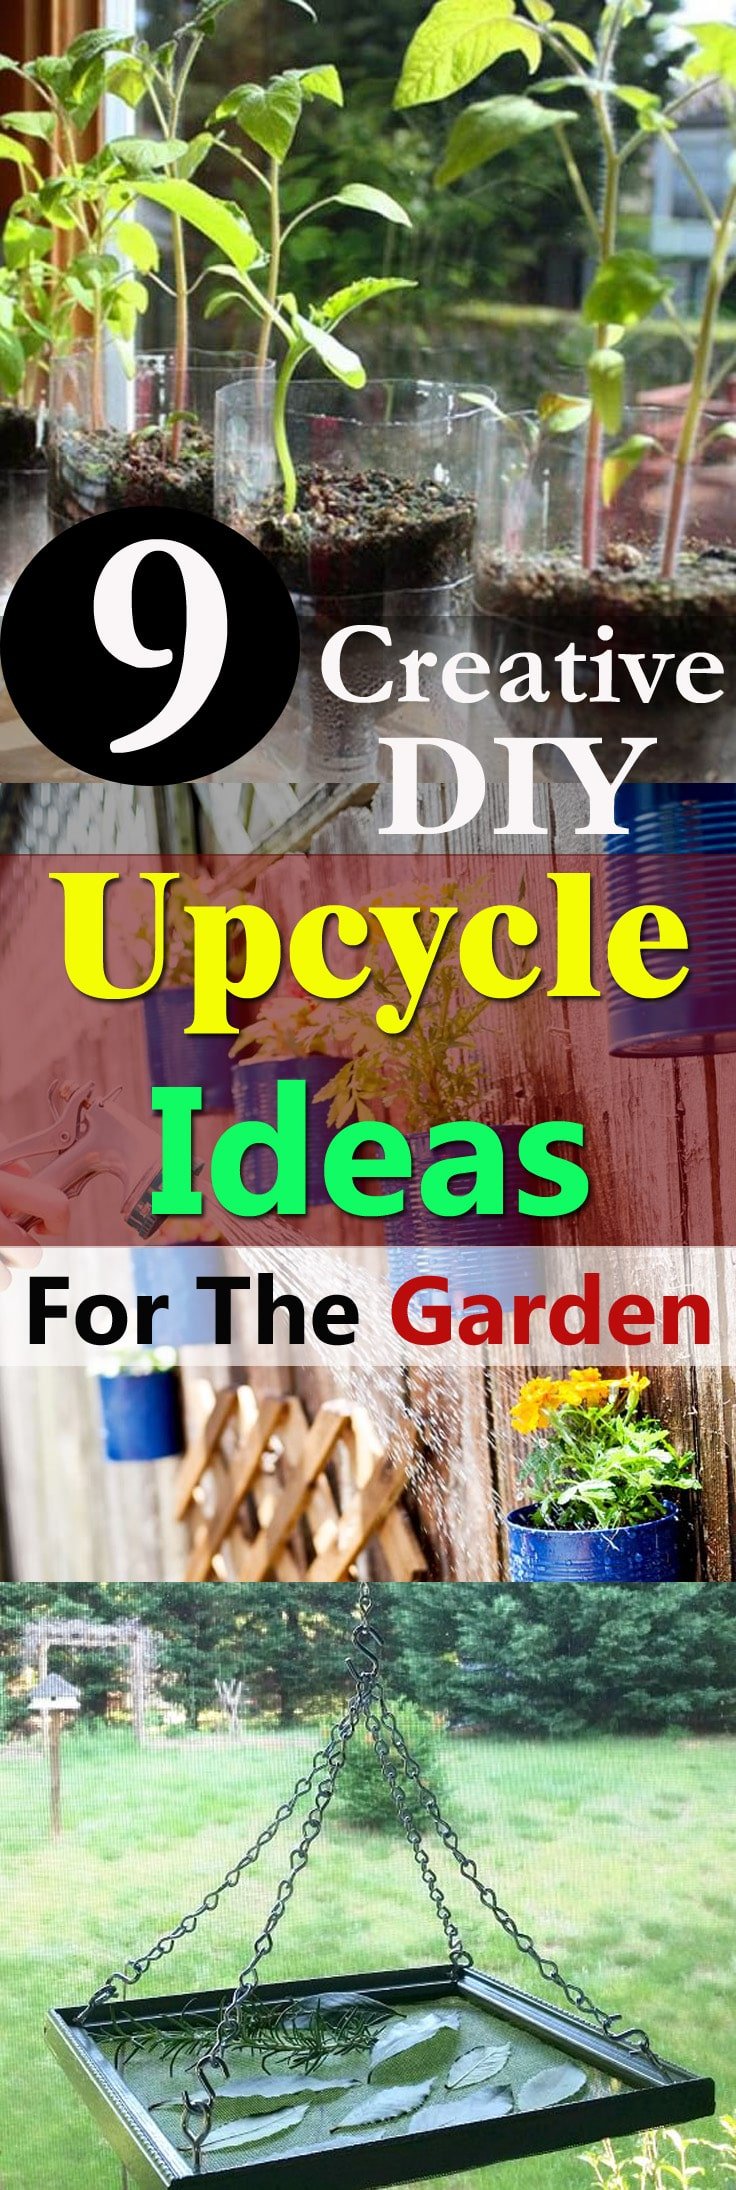 If you like to reuse and recycle your old things, take a look at these DIY Upcycle Ideas for the Garden!